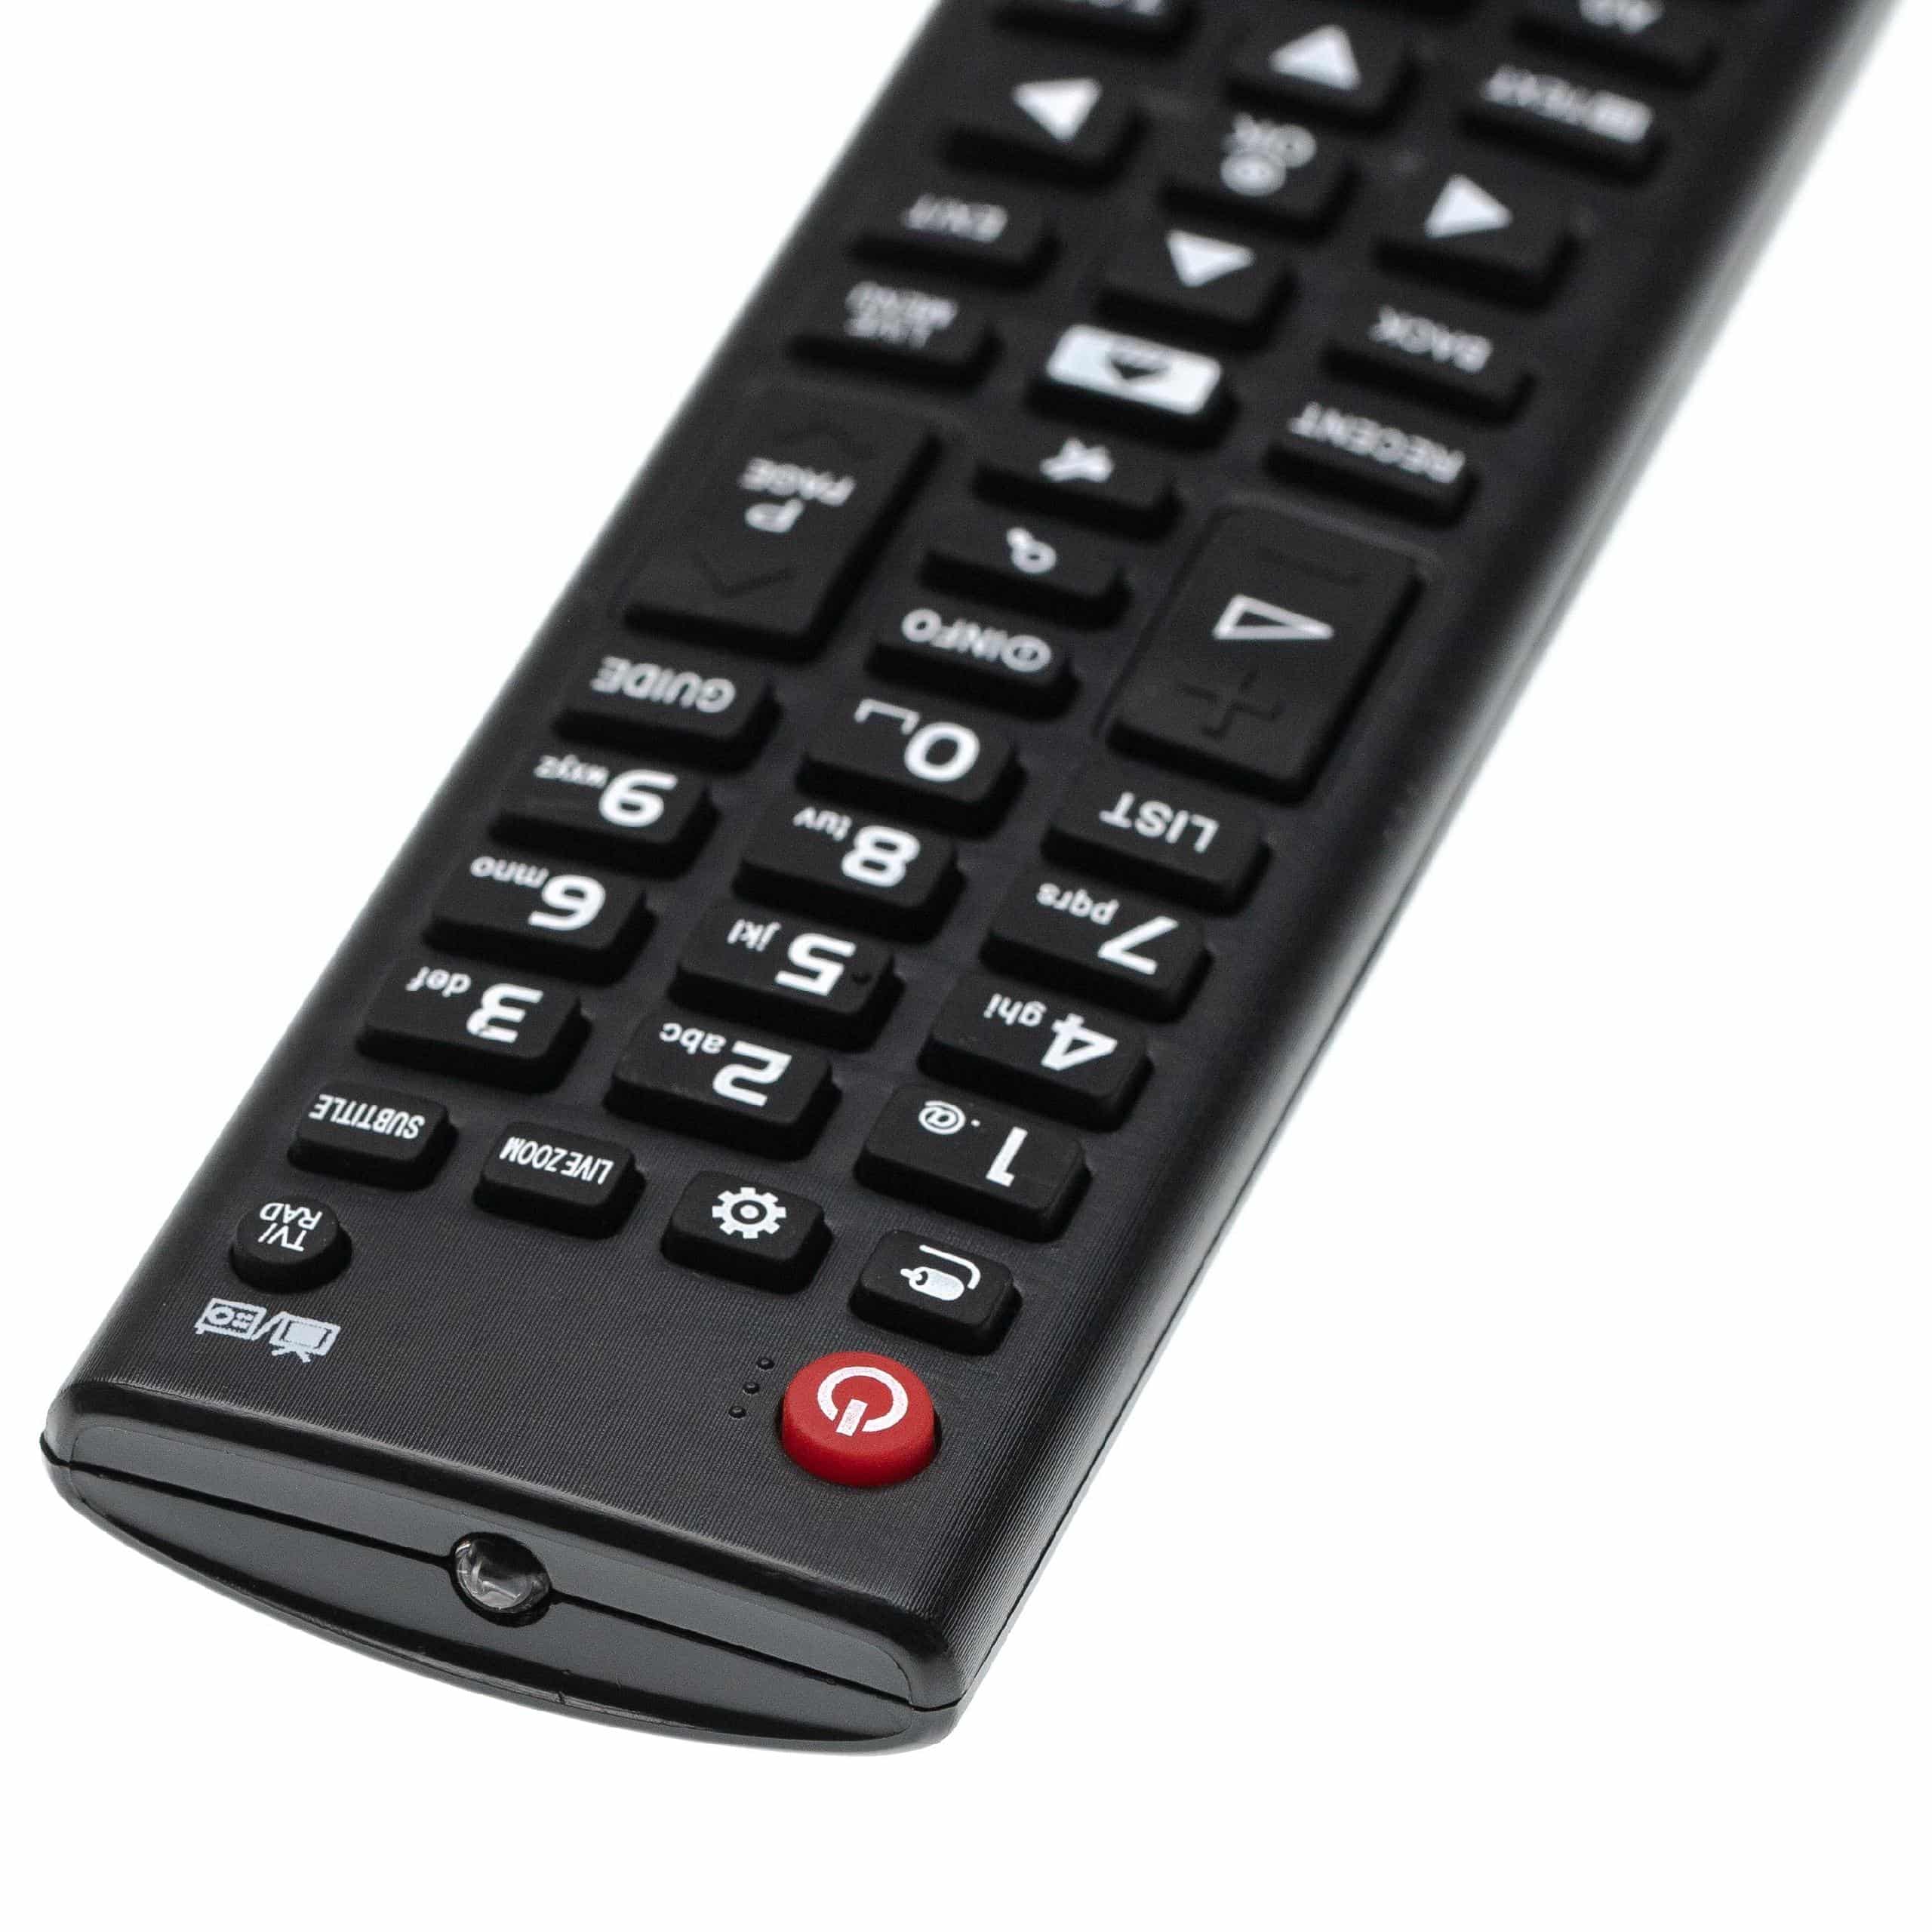 Remote Control replaces LG AKB74915324 for LG TV